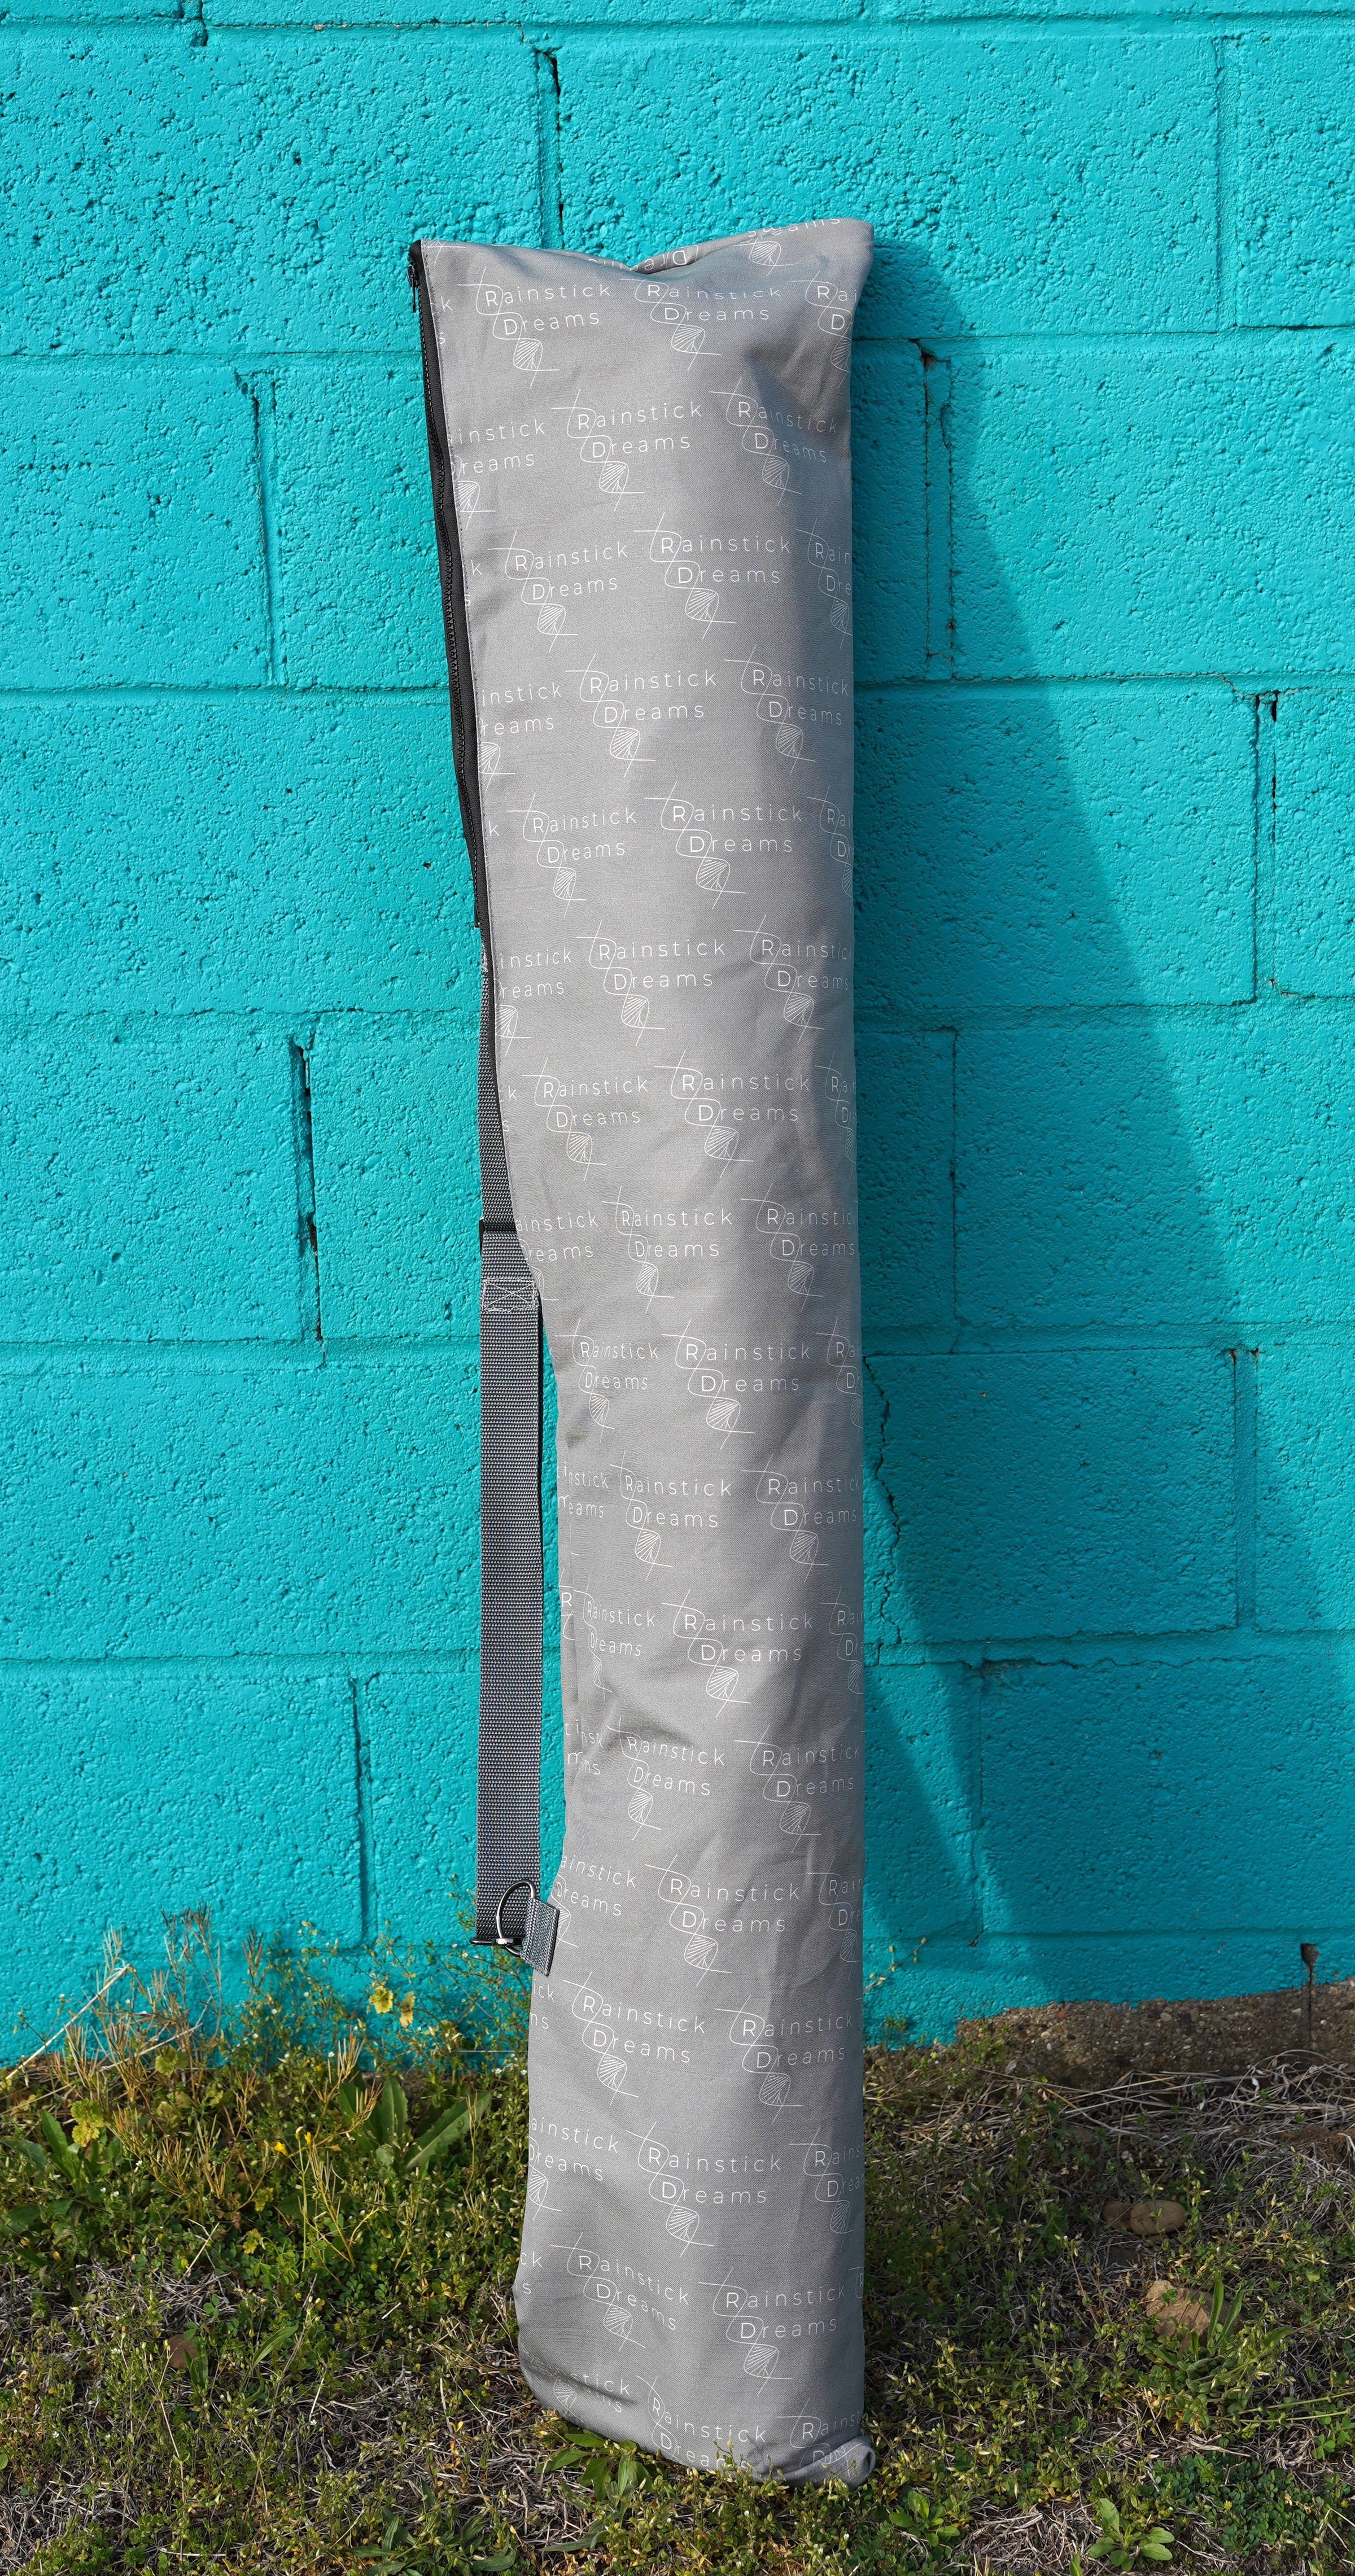 XL Carrying Bag by Rainstick Dreams for your XL Amaranth or Microbeads spiral sounds rain stick. Double lined with an adjustable strap to take your sound bath meditation sleep aid rainstick anywhere!